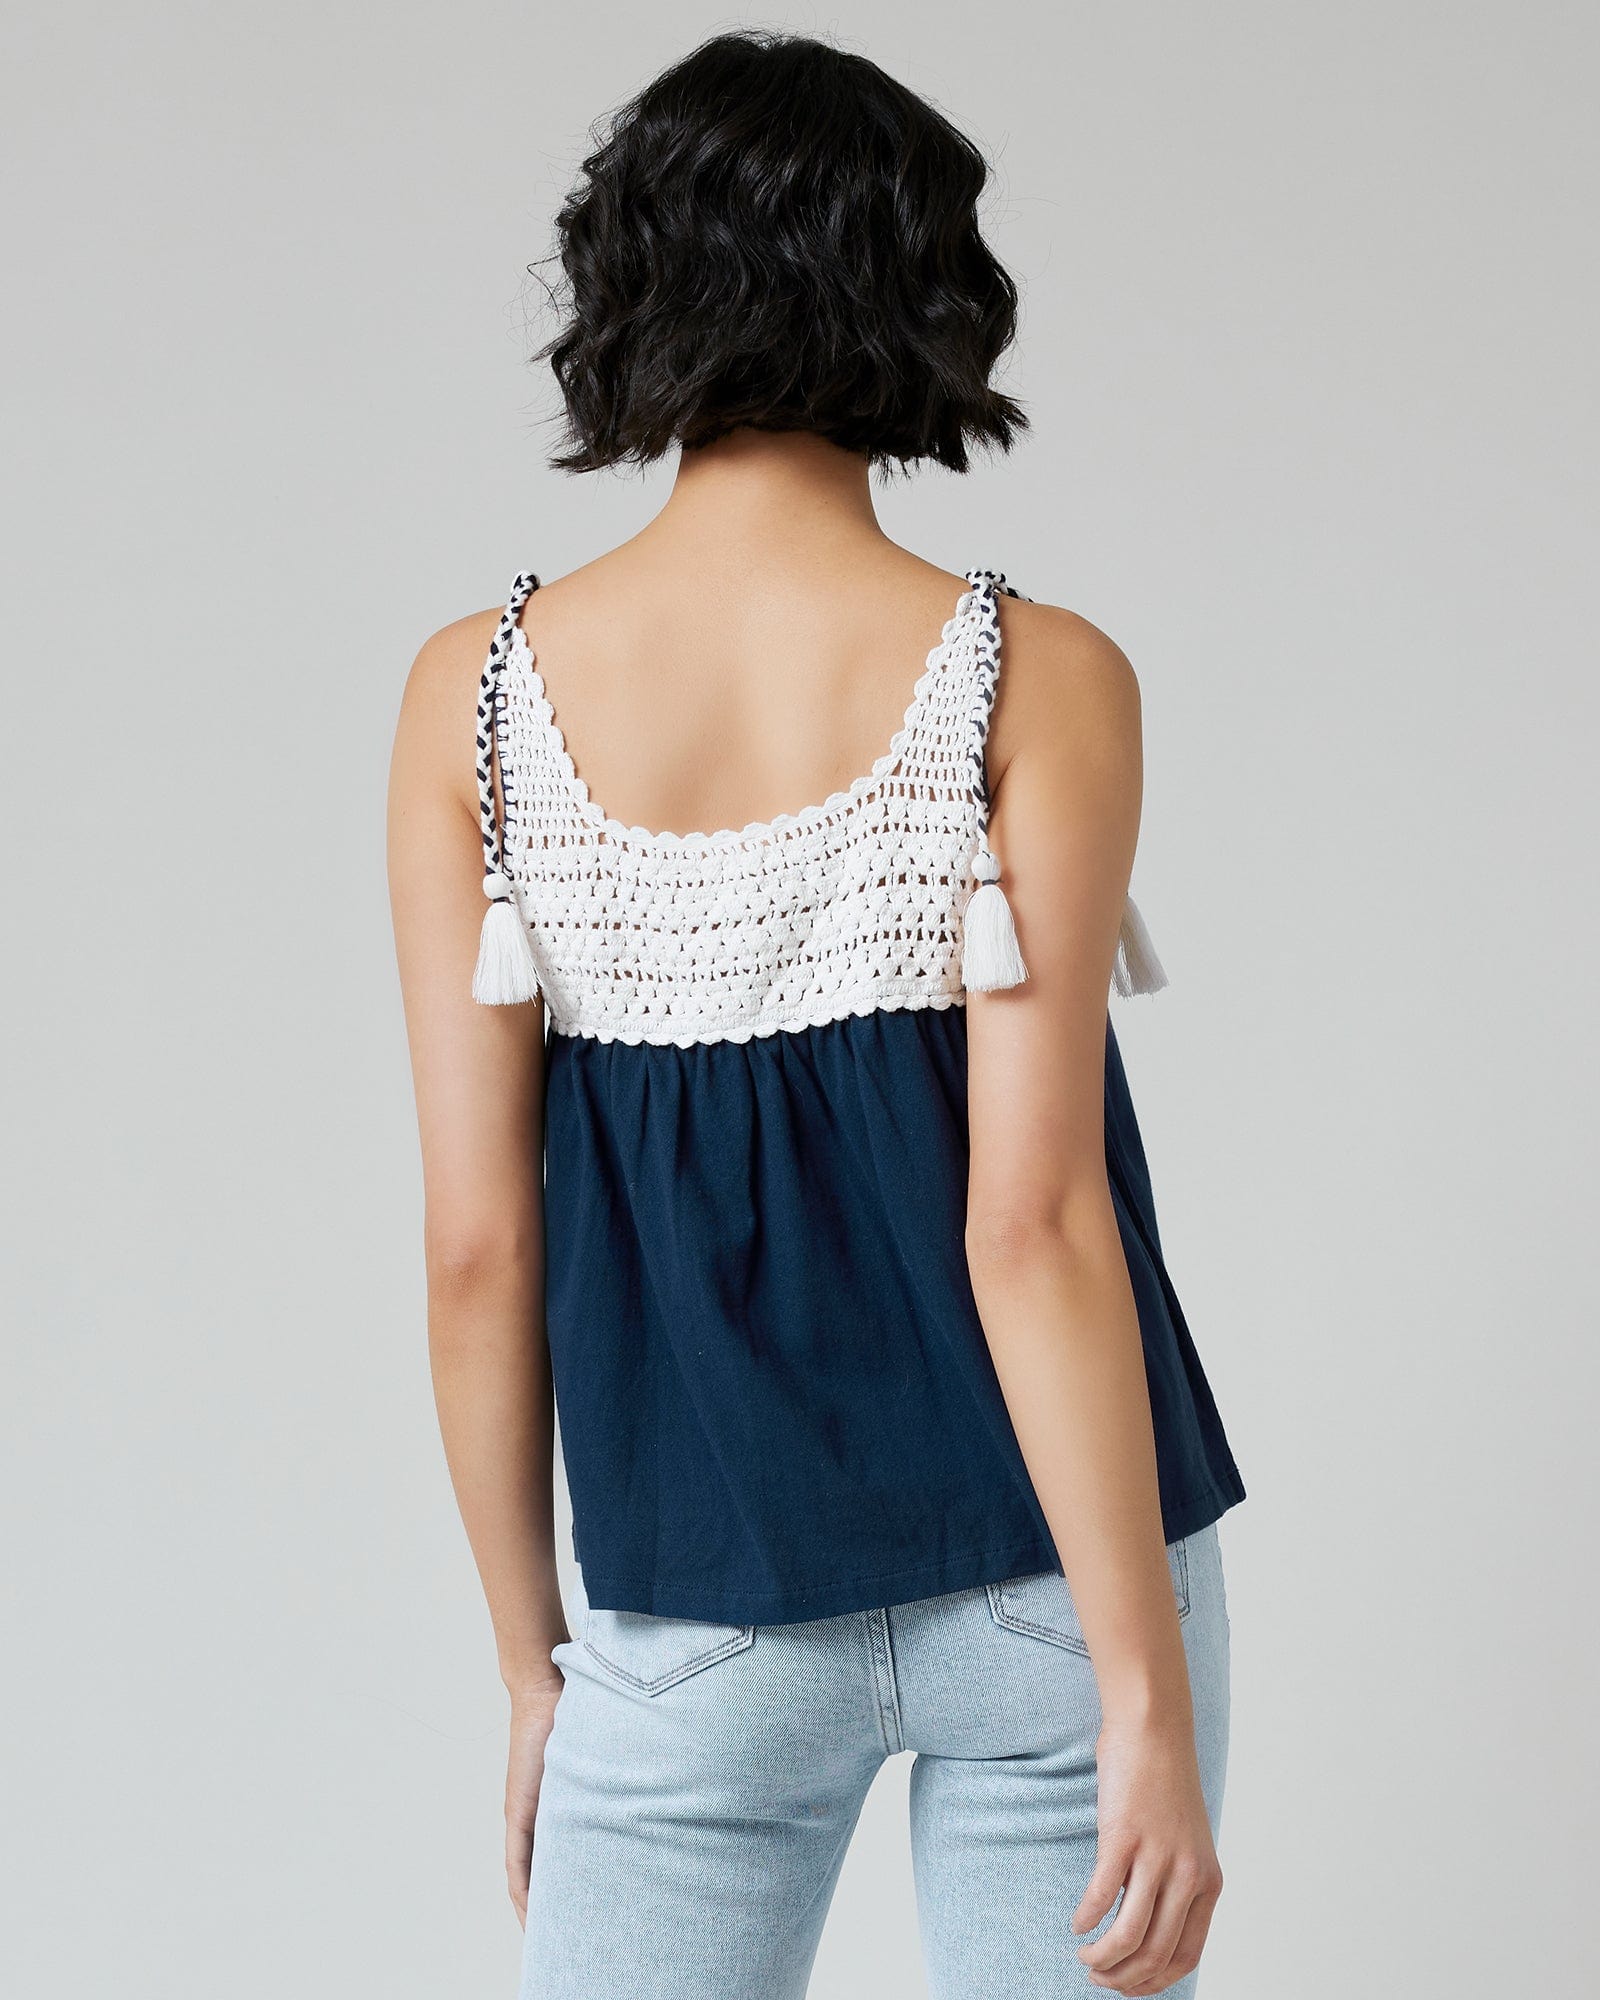 Woman in a navy tank top with crocheted fabric at top